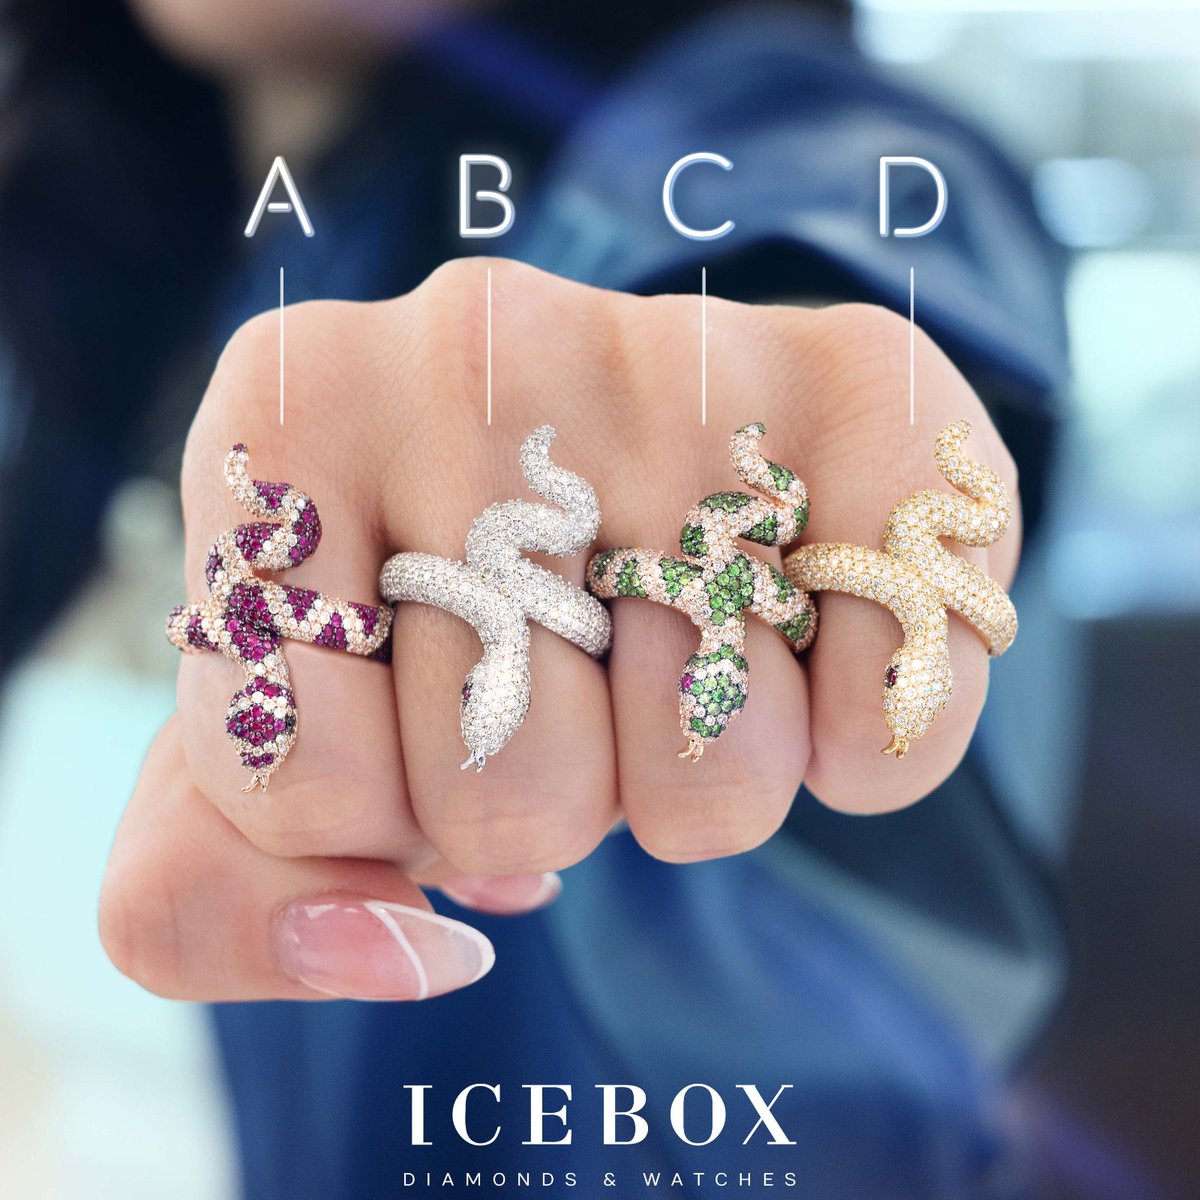 Zonnebrand Datum Rationeel ICEBOX - Shop icebox.com! on Twitter: "Which snake ring would you wear?  🐍💎 https://t.co/cn9LTUwCx4" / Twitter